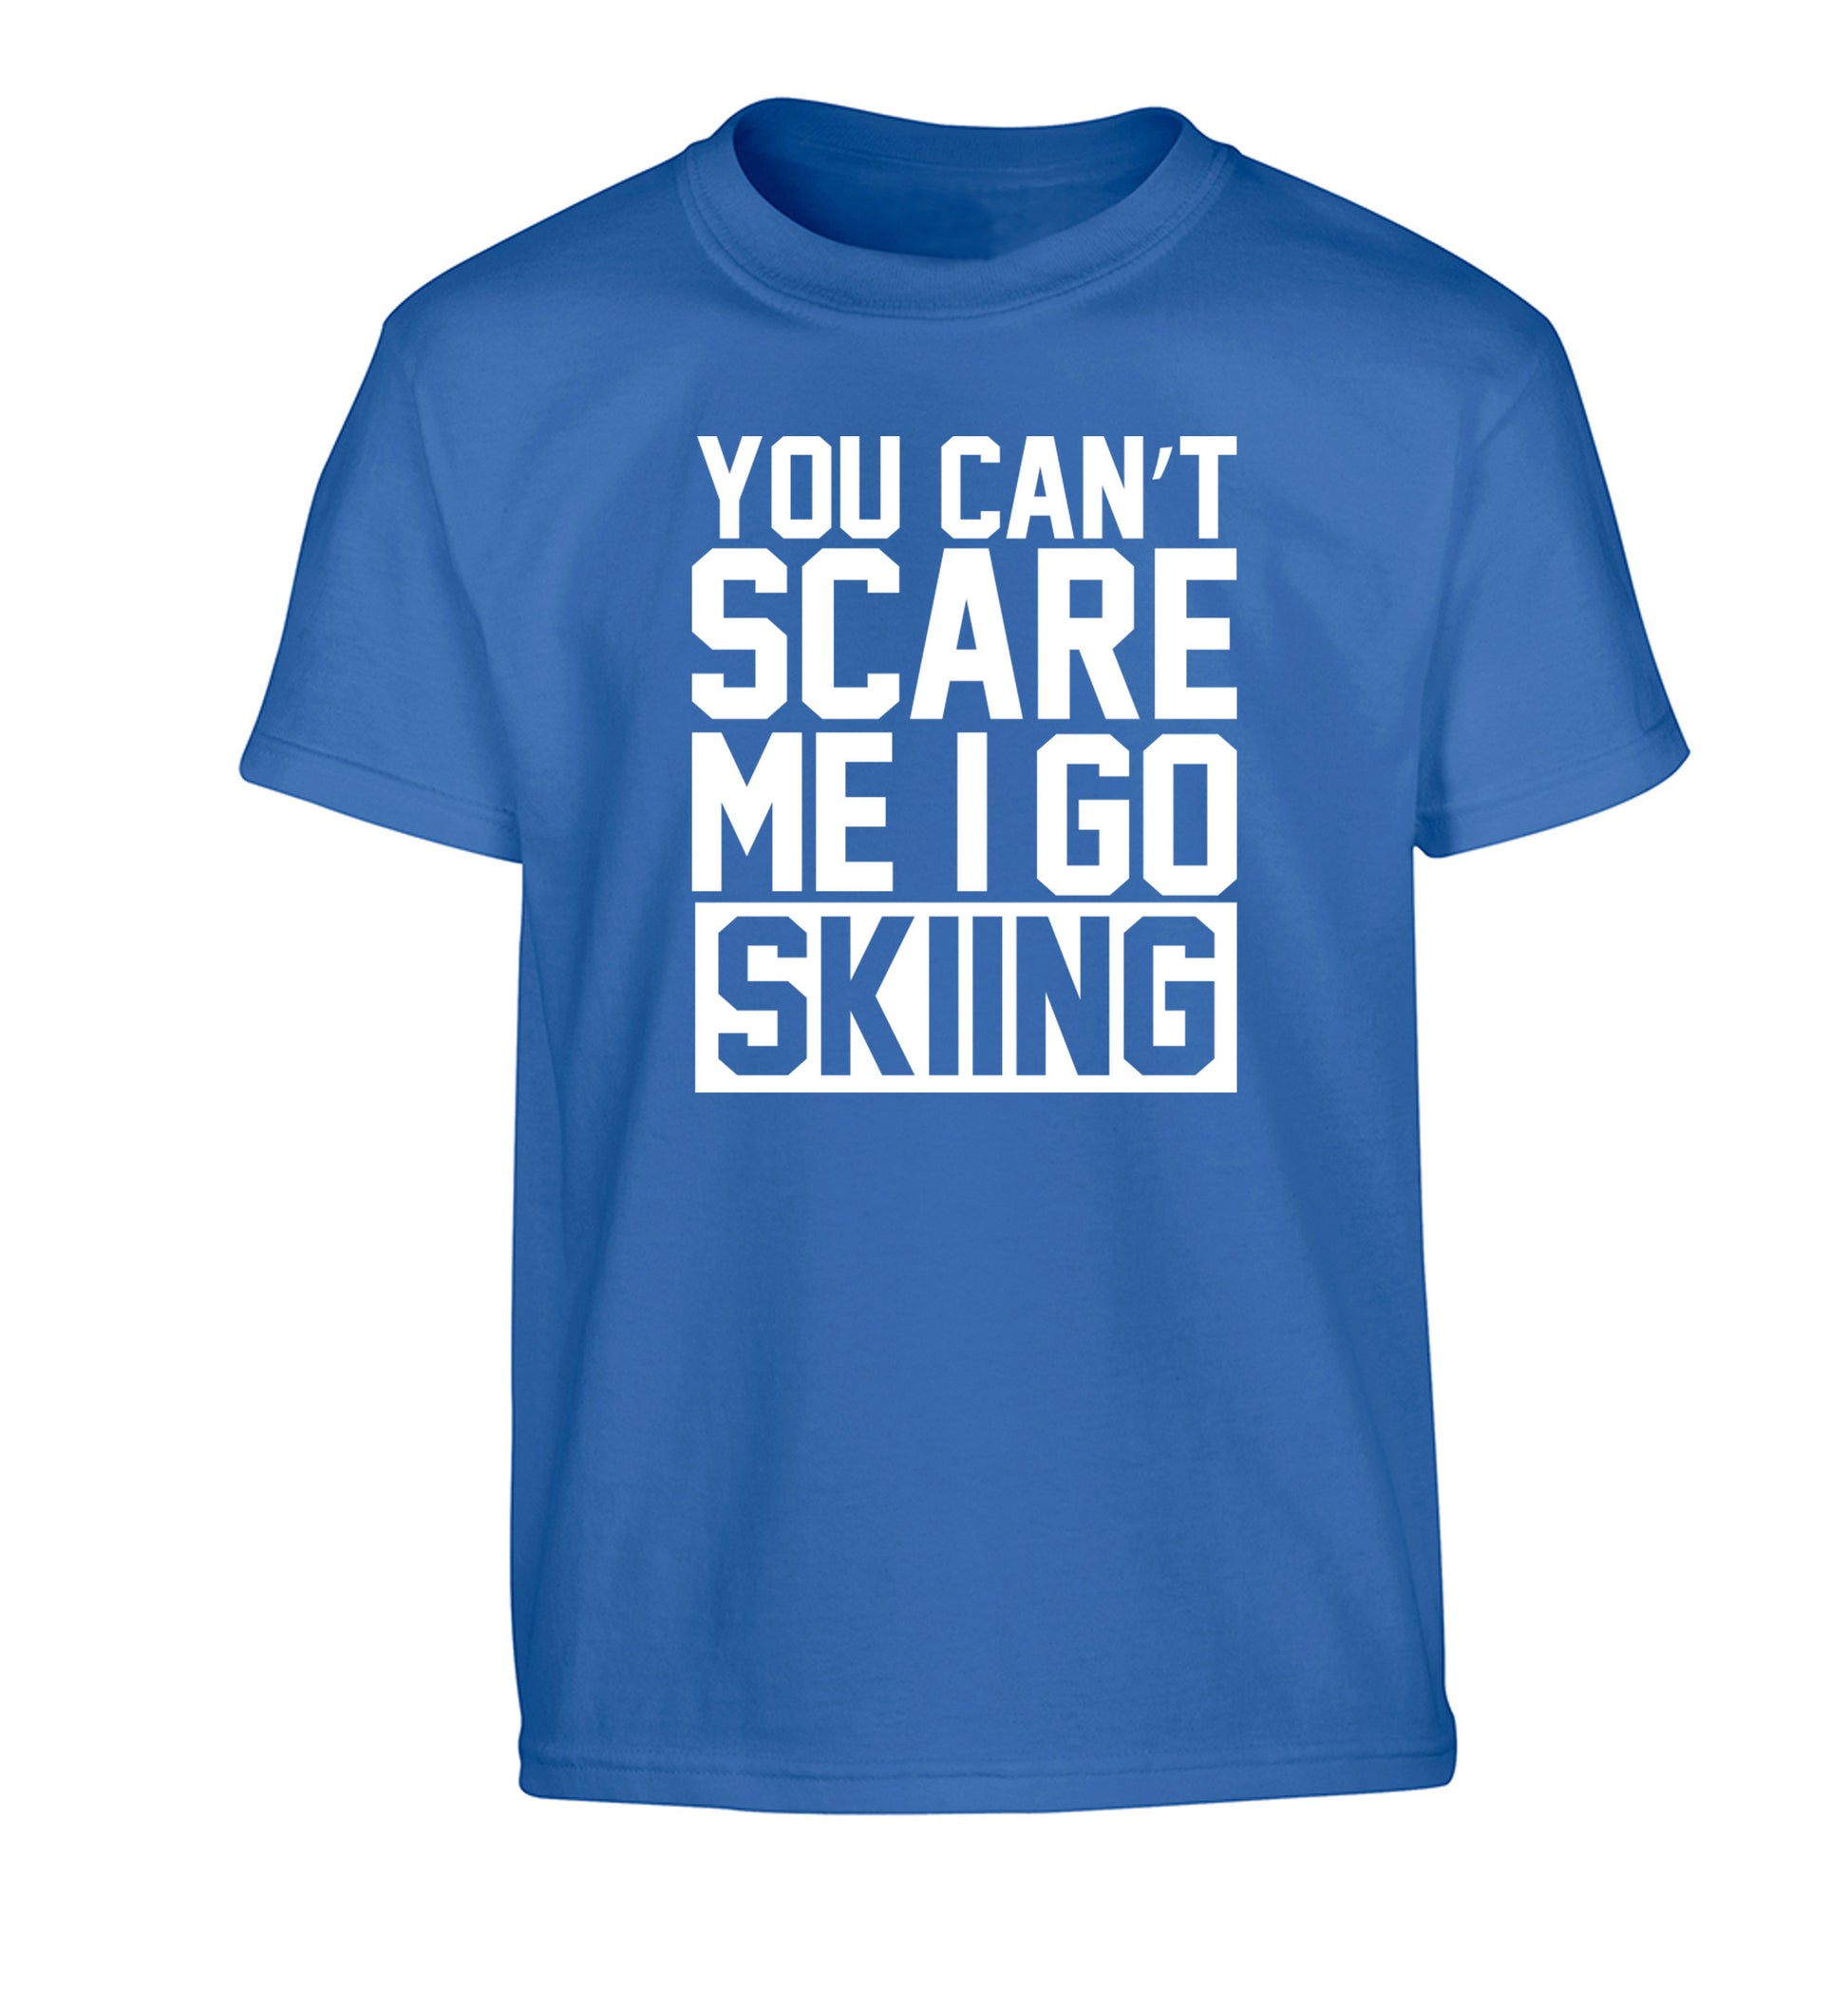 You can't scare me I go skiing Children's blue Tshirt 12-14 Years